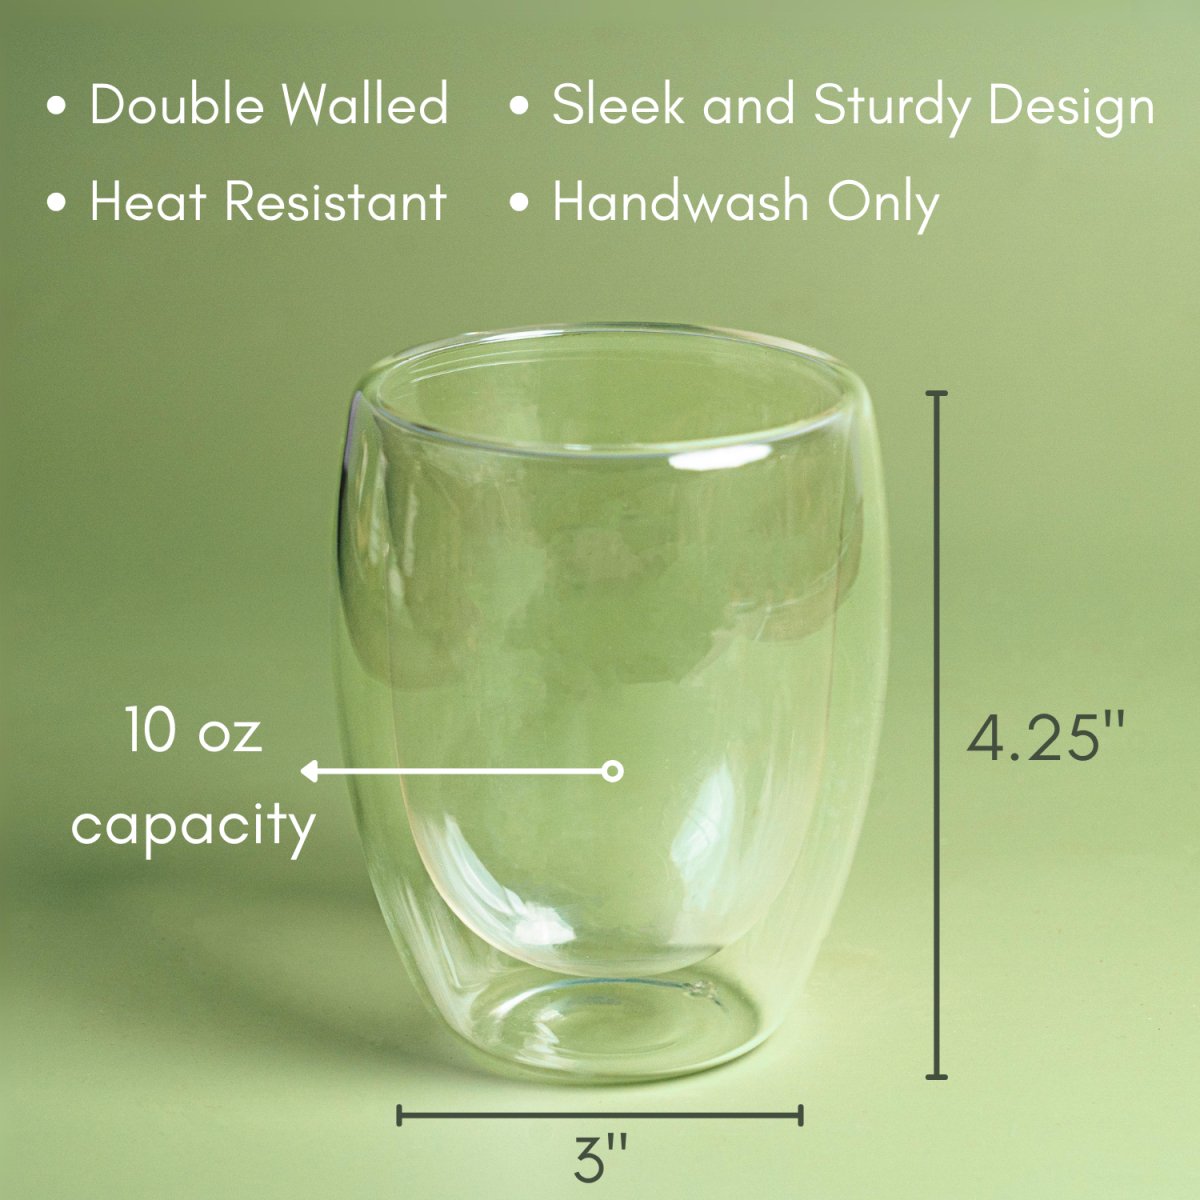 Double Walled Glass Teacup - Accessories - Full Leaf Tea Company